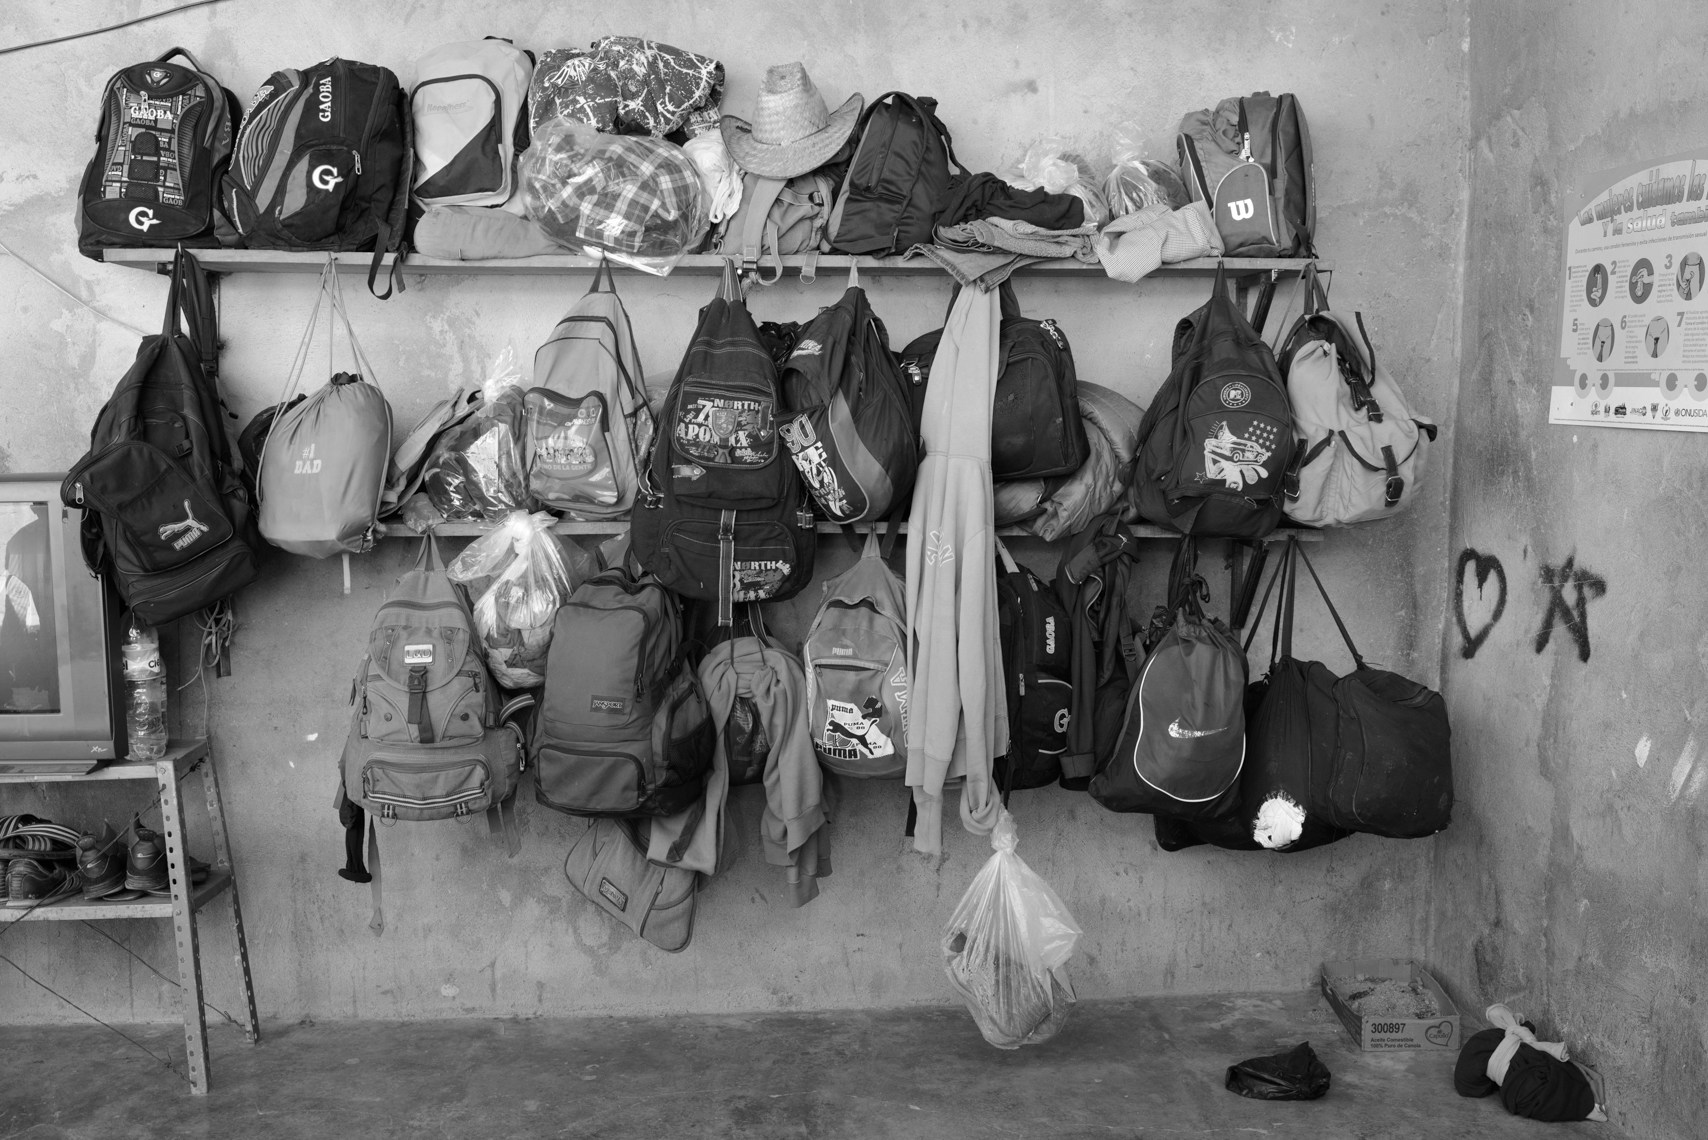 Backpacks hold migrants' possessions at a shelter for migrants in Chahuites, Oaxaca.